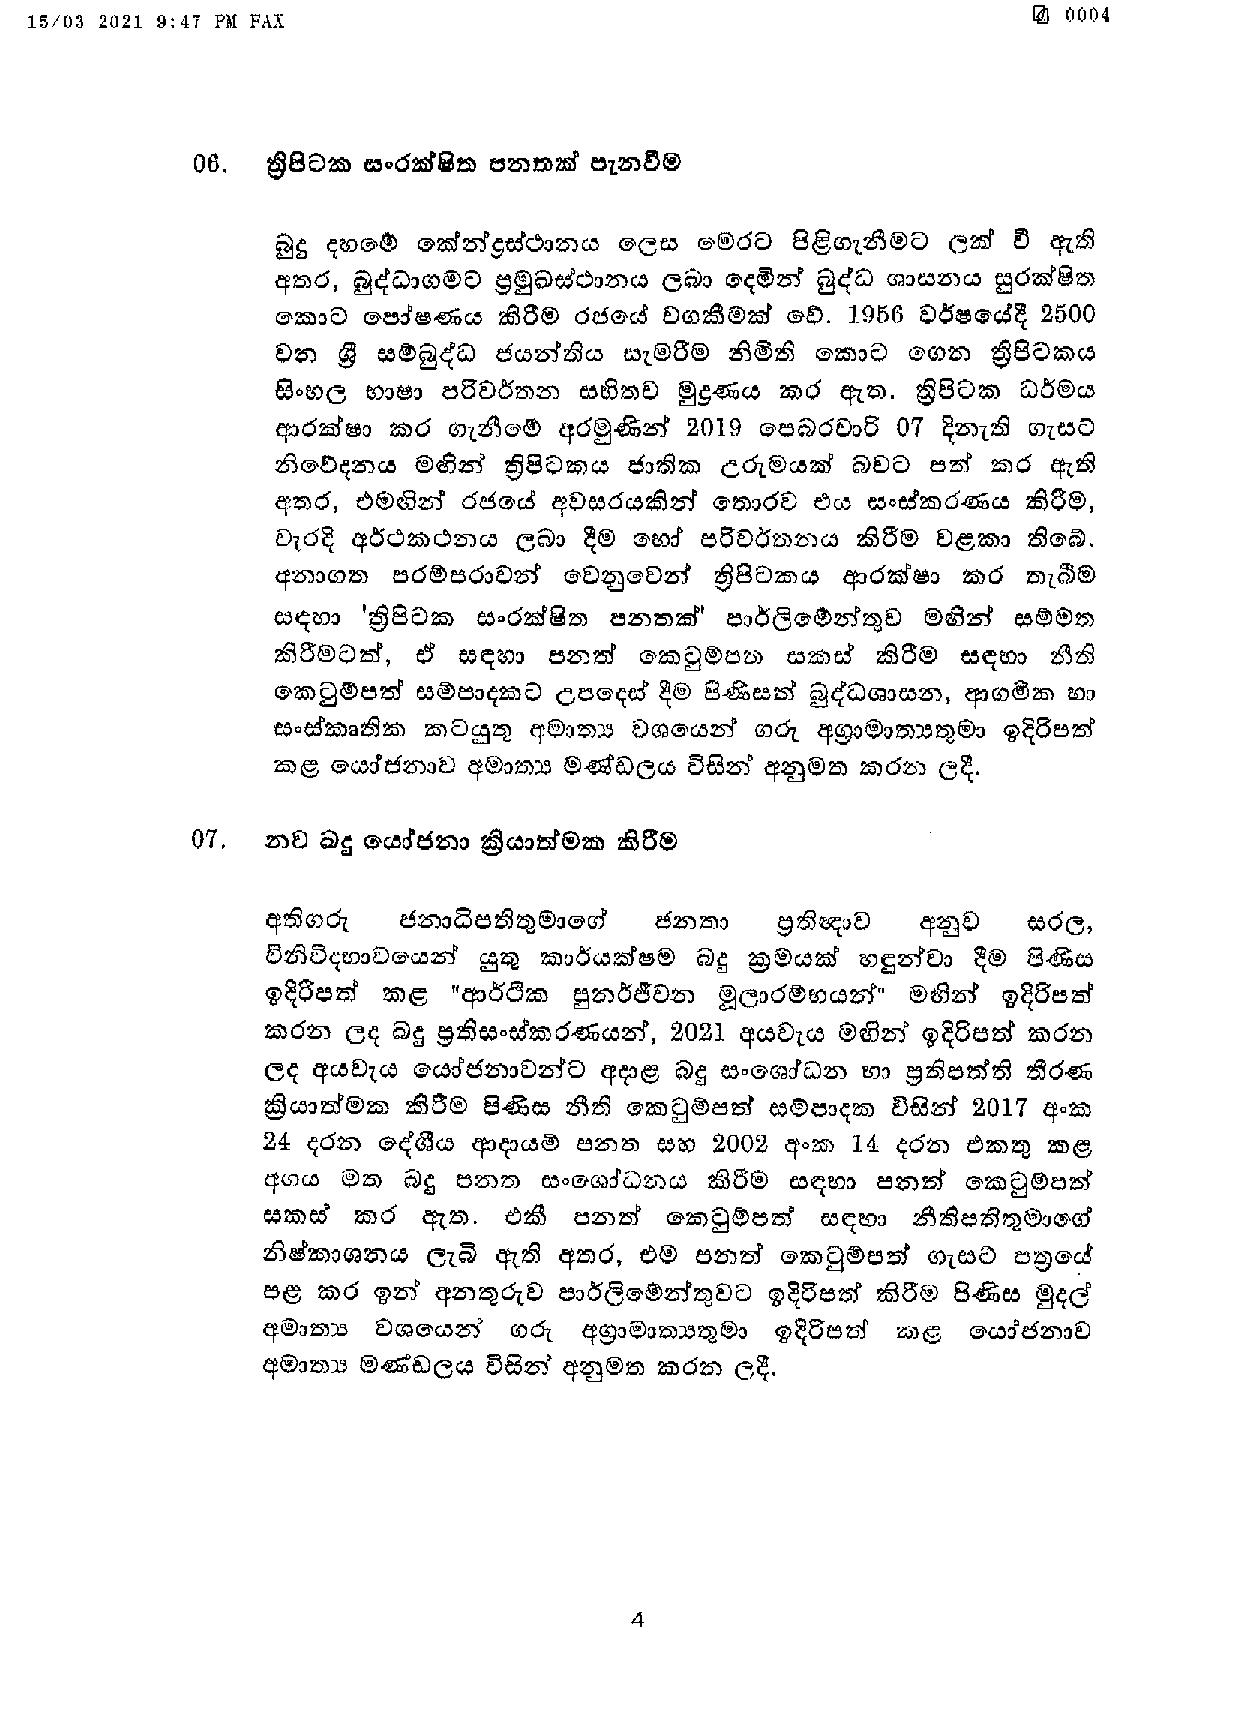 Cabinet Decision on 15.03.2021 page 004